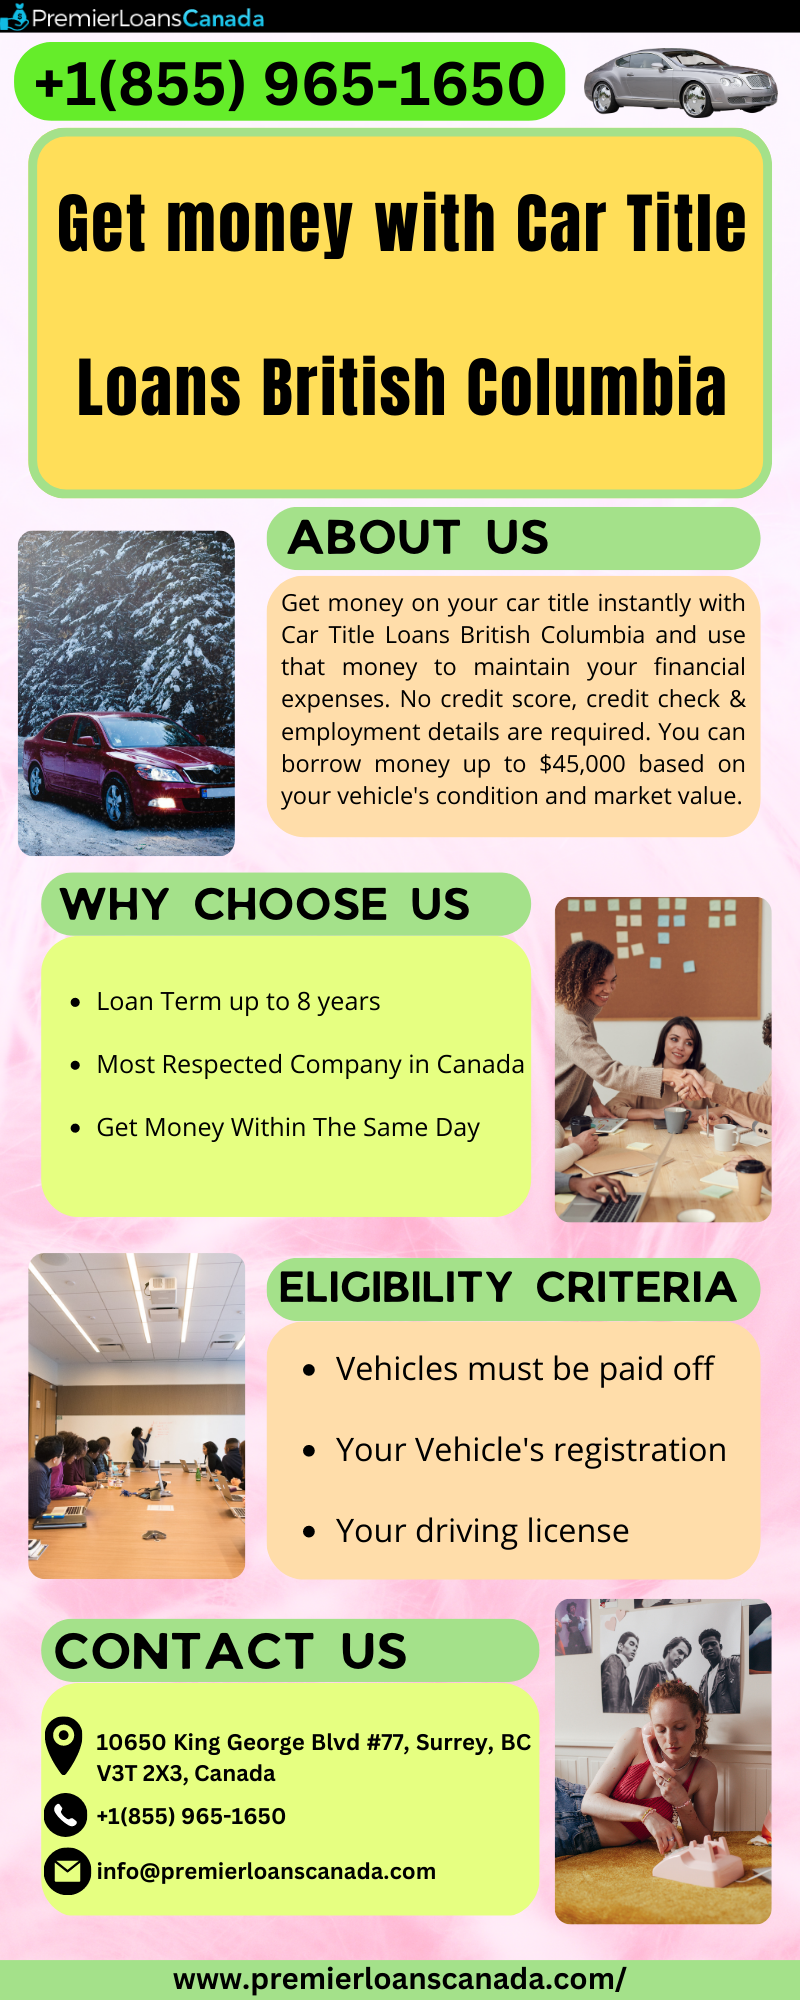 Get money with Car Title Loans British Columbia against car title